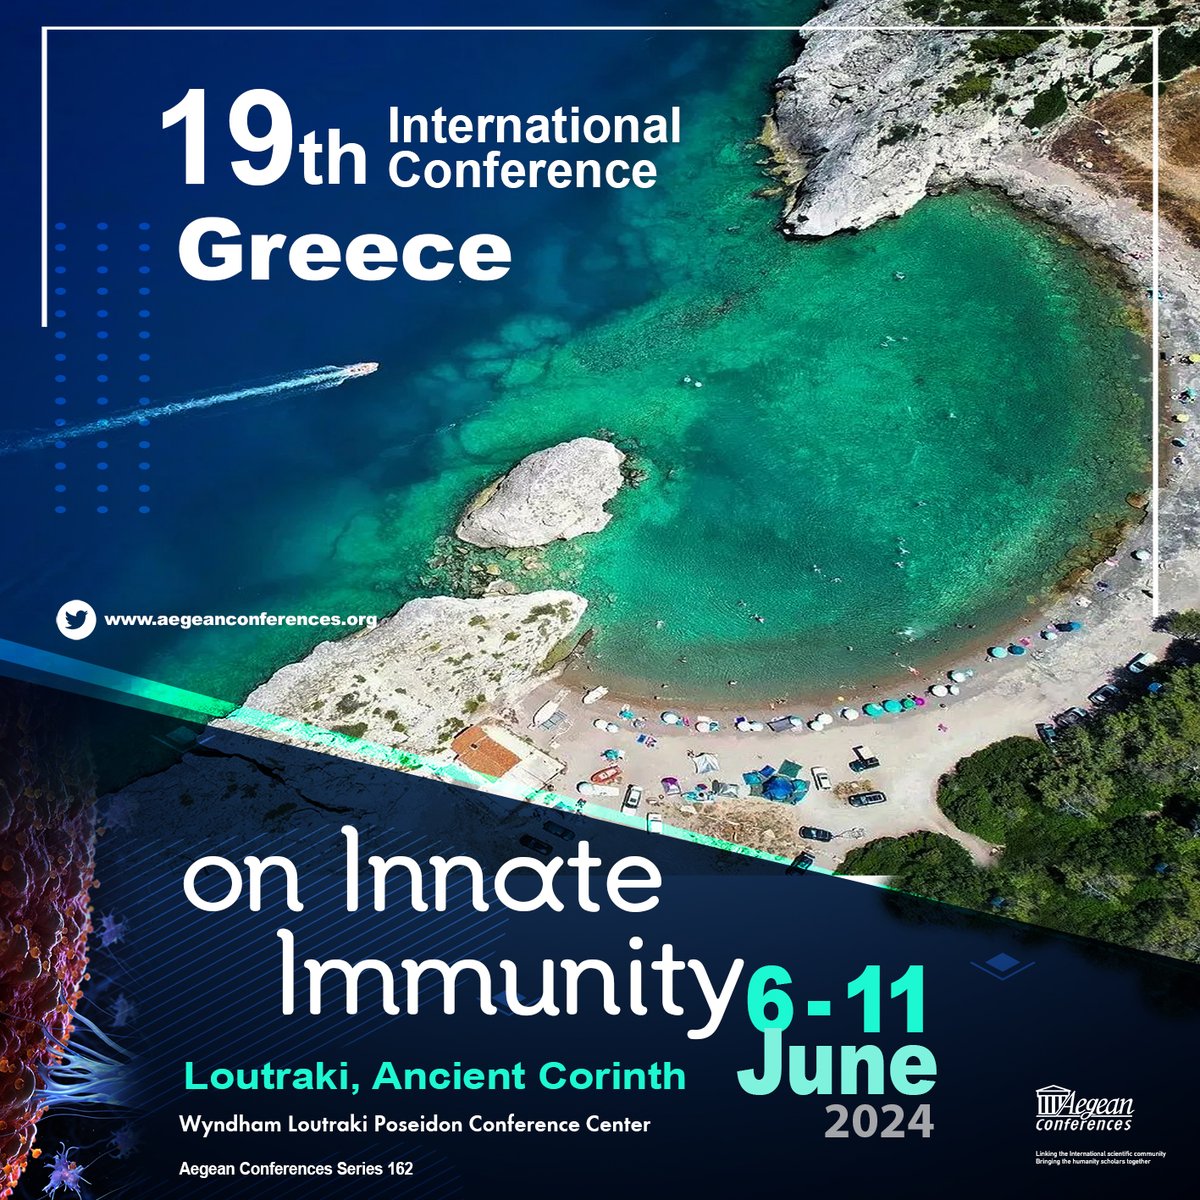 Deadline Extended NOW February 29: Abstract Submission / Early RegistrationFee / Travel Award Application to the 19th Aegean Conference on #InnateImmunity held In #Loutraki, #Greece aegeanconferences.org/src/App/confer…